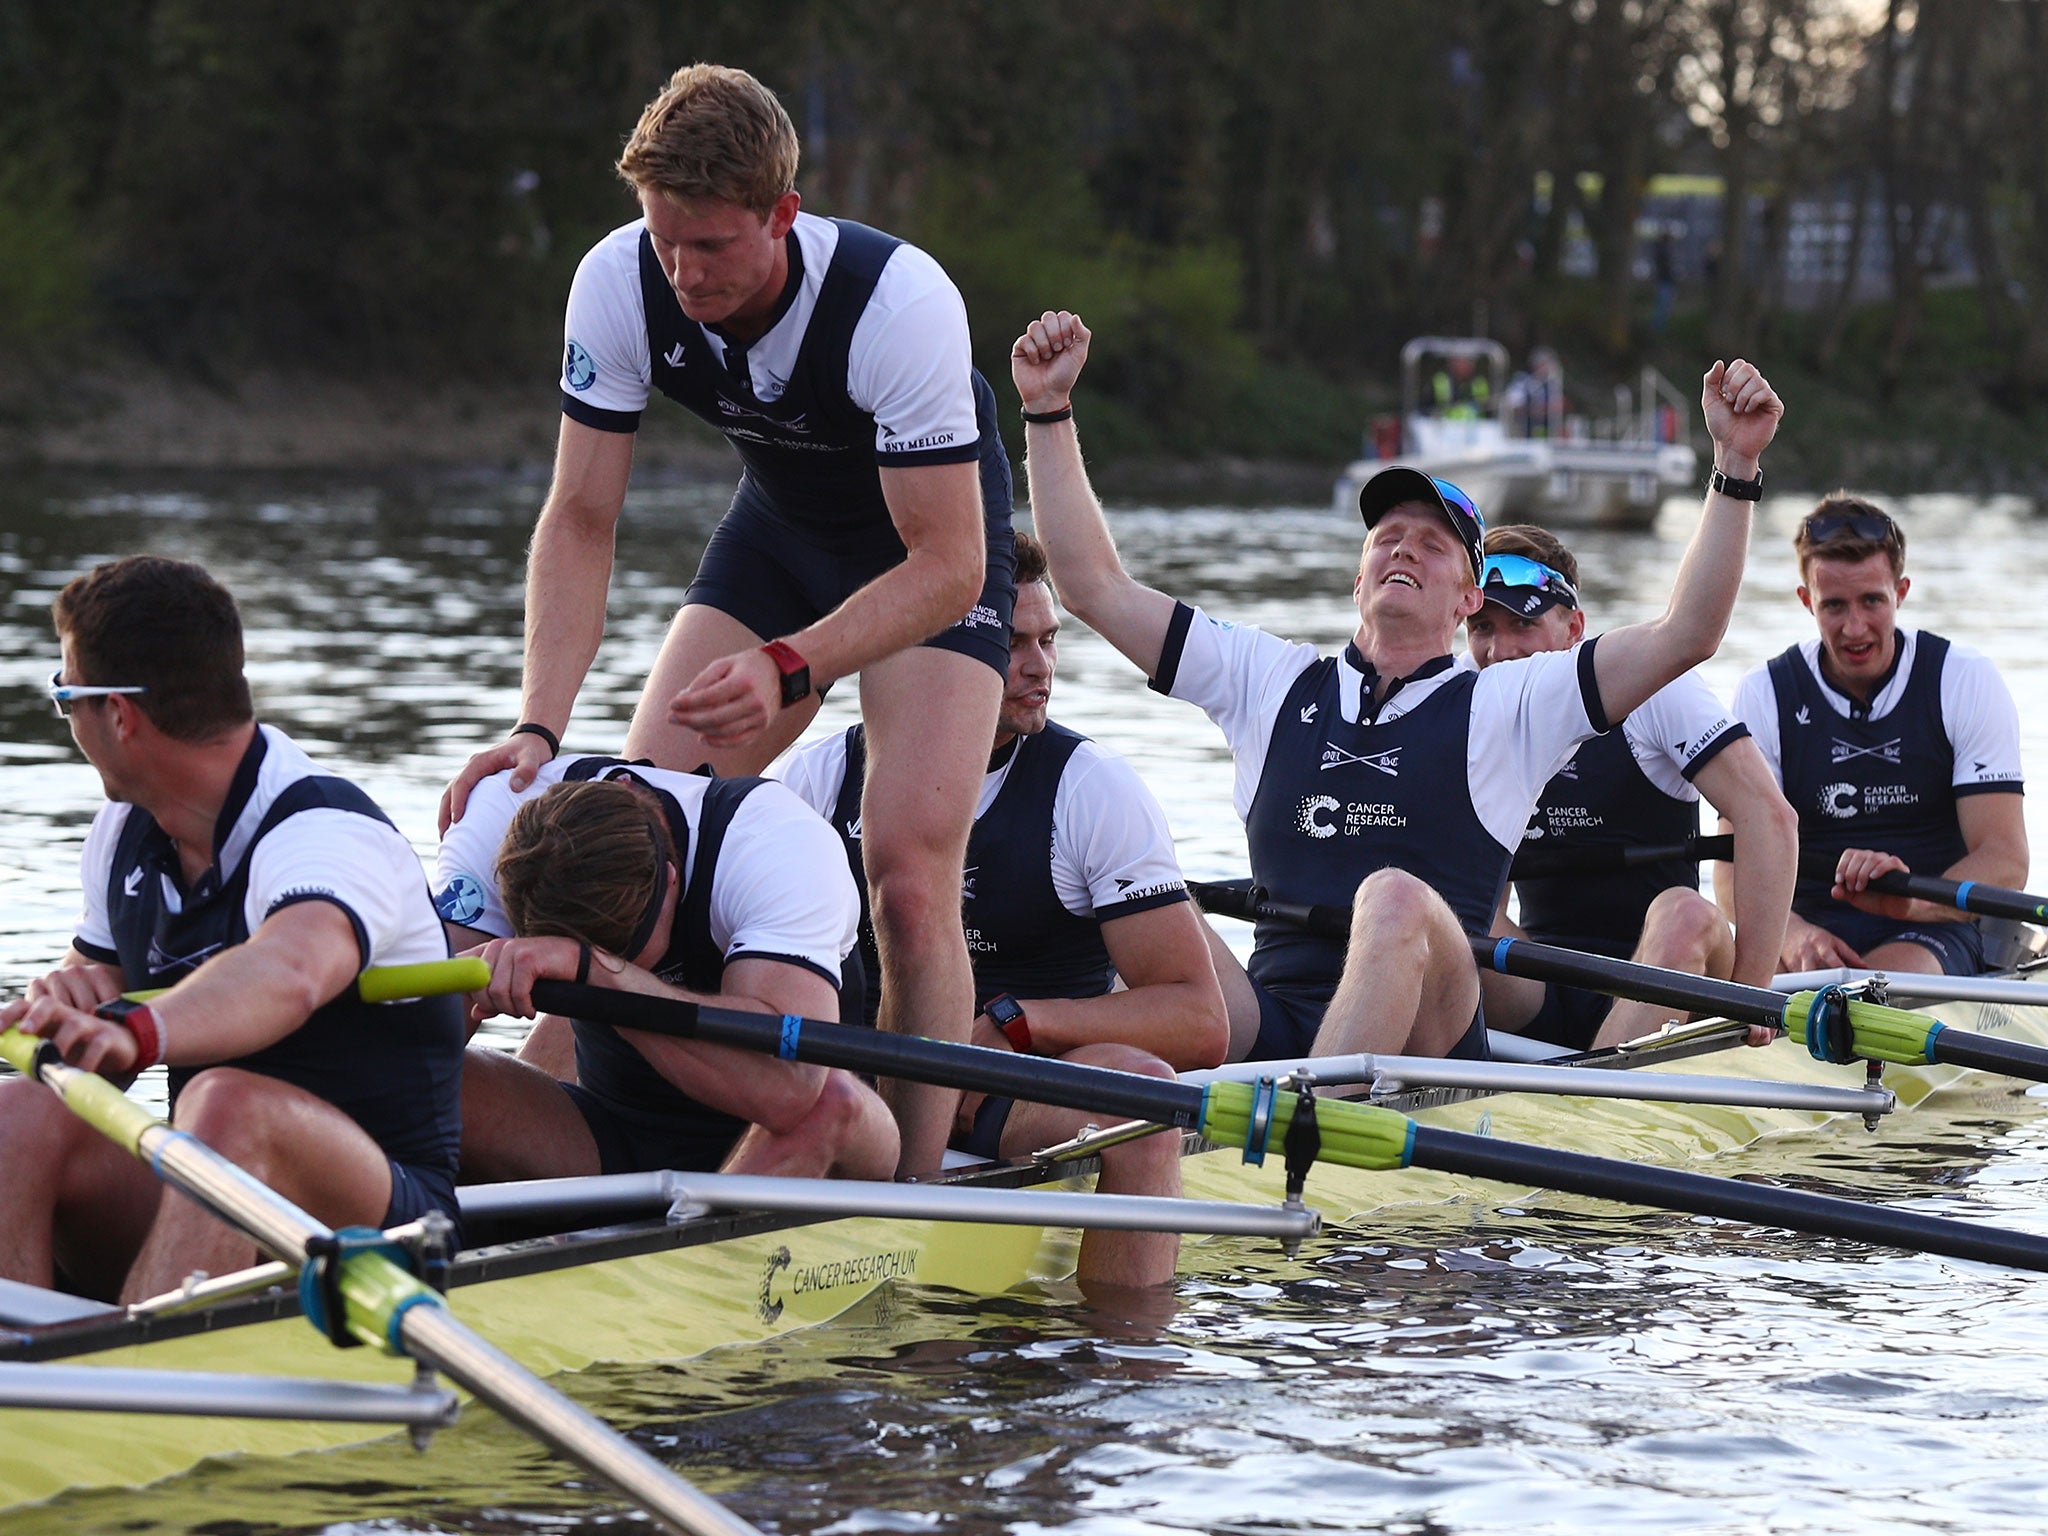 Oxford's team celebrate after crossing the line